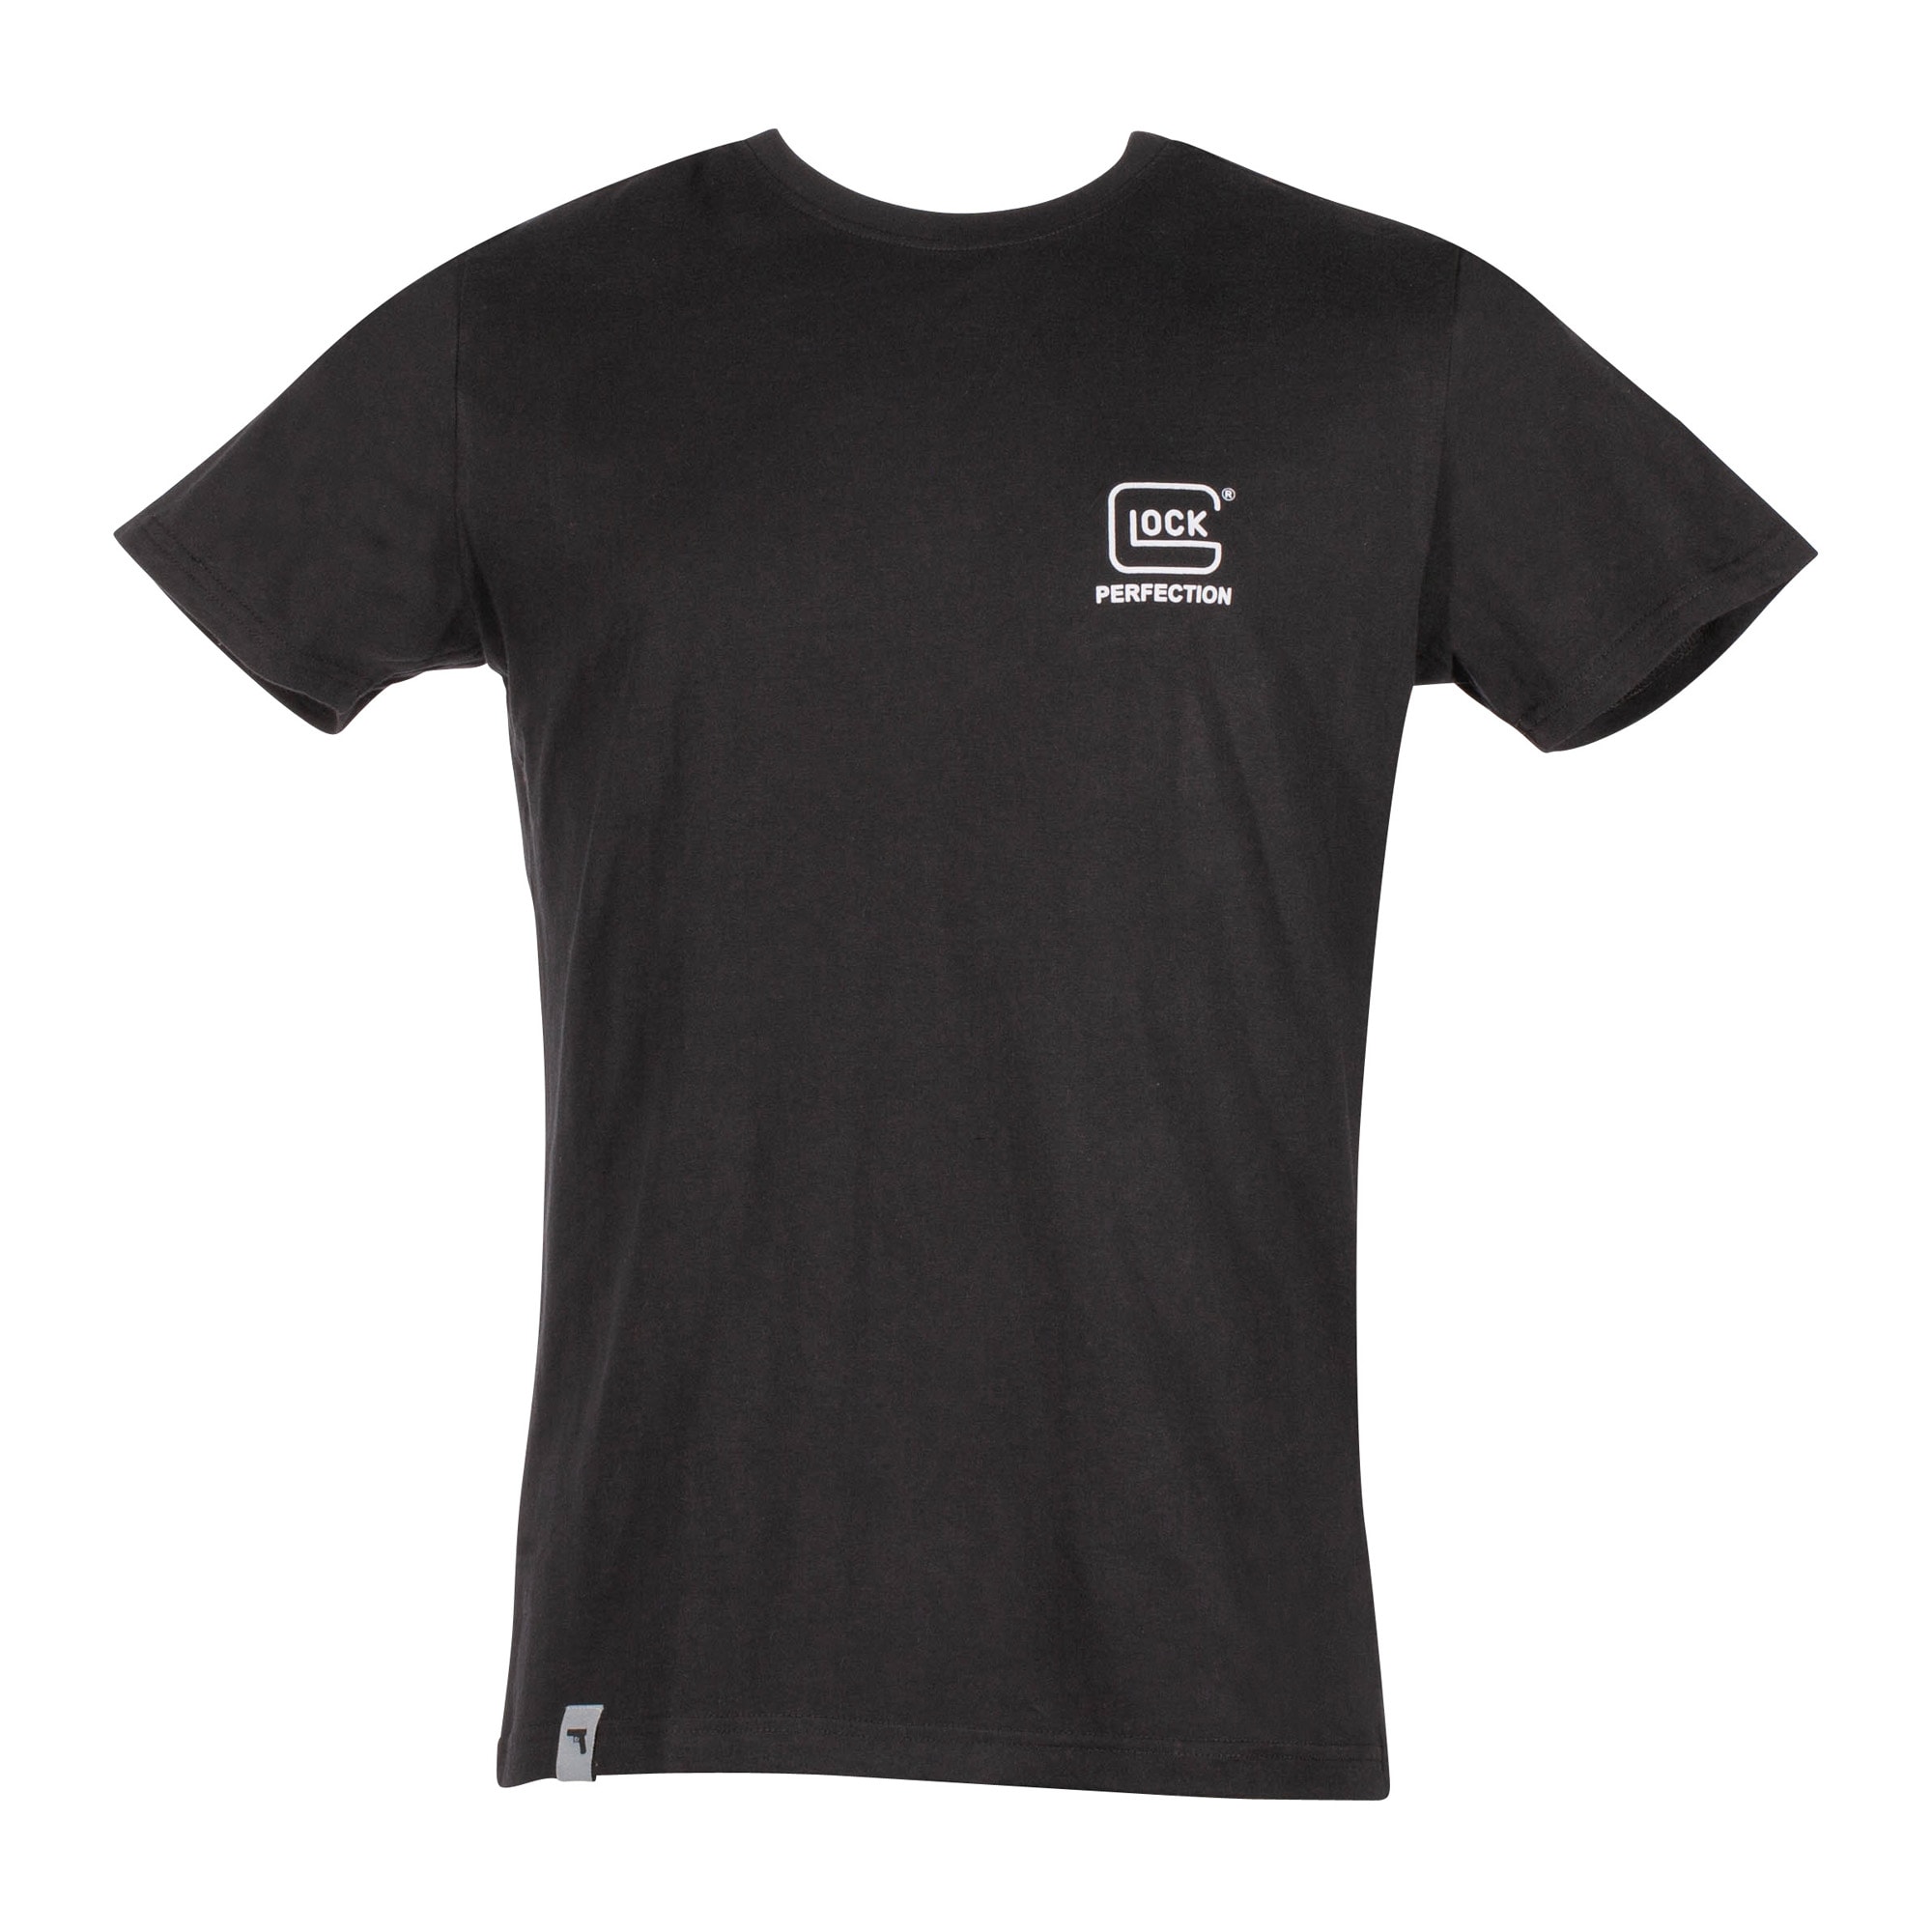 Purchase the Glock T-Shirt Perfection black by ASMC